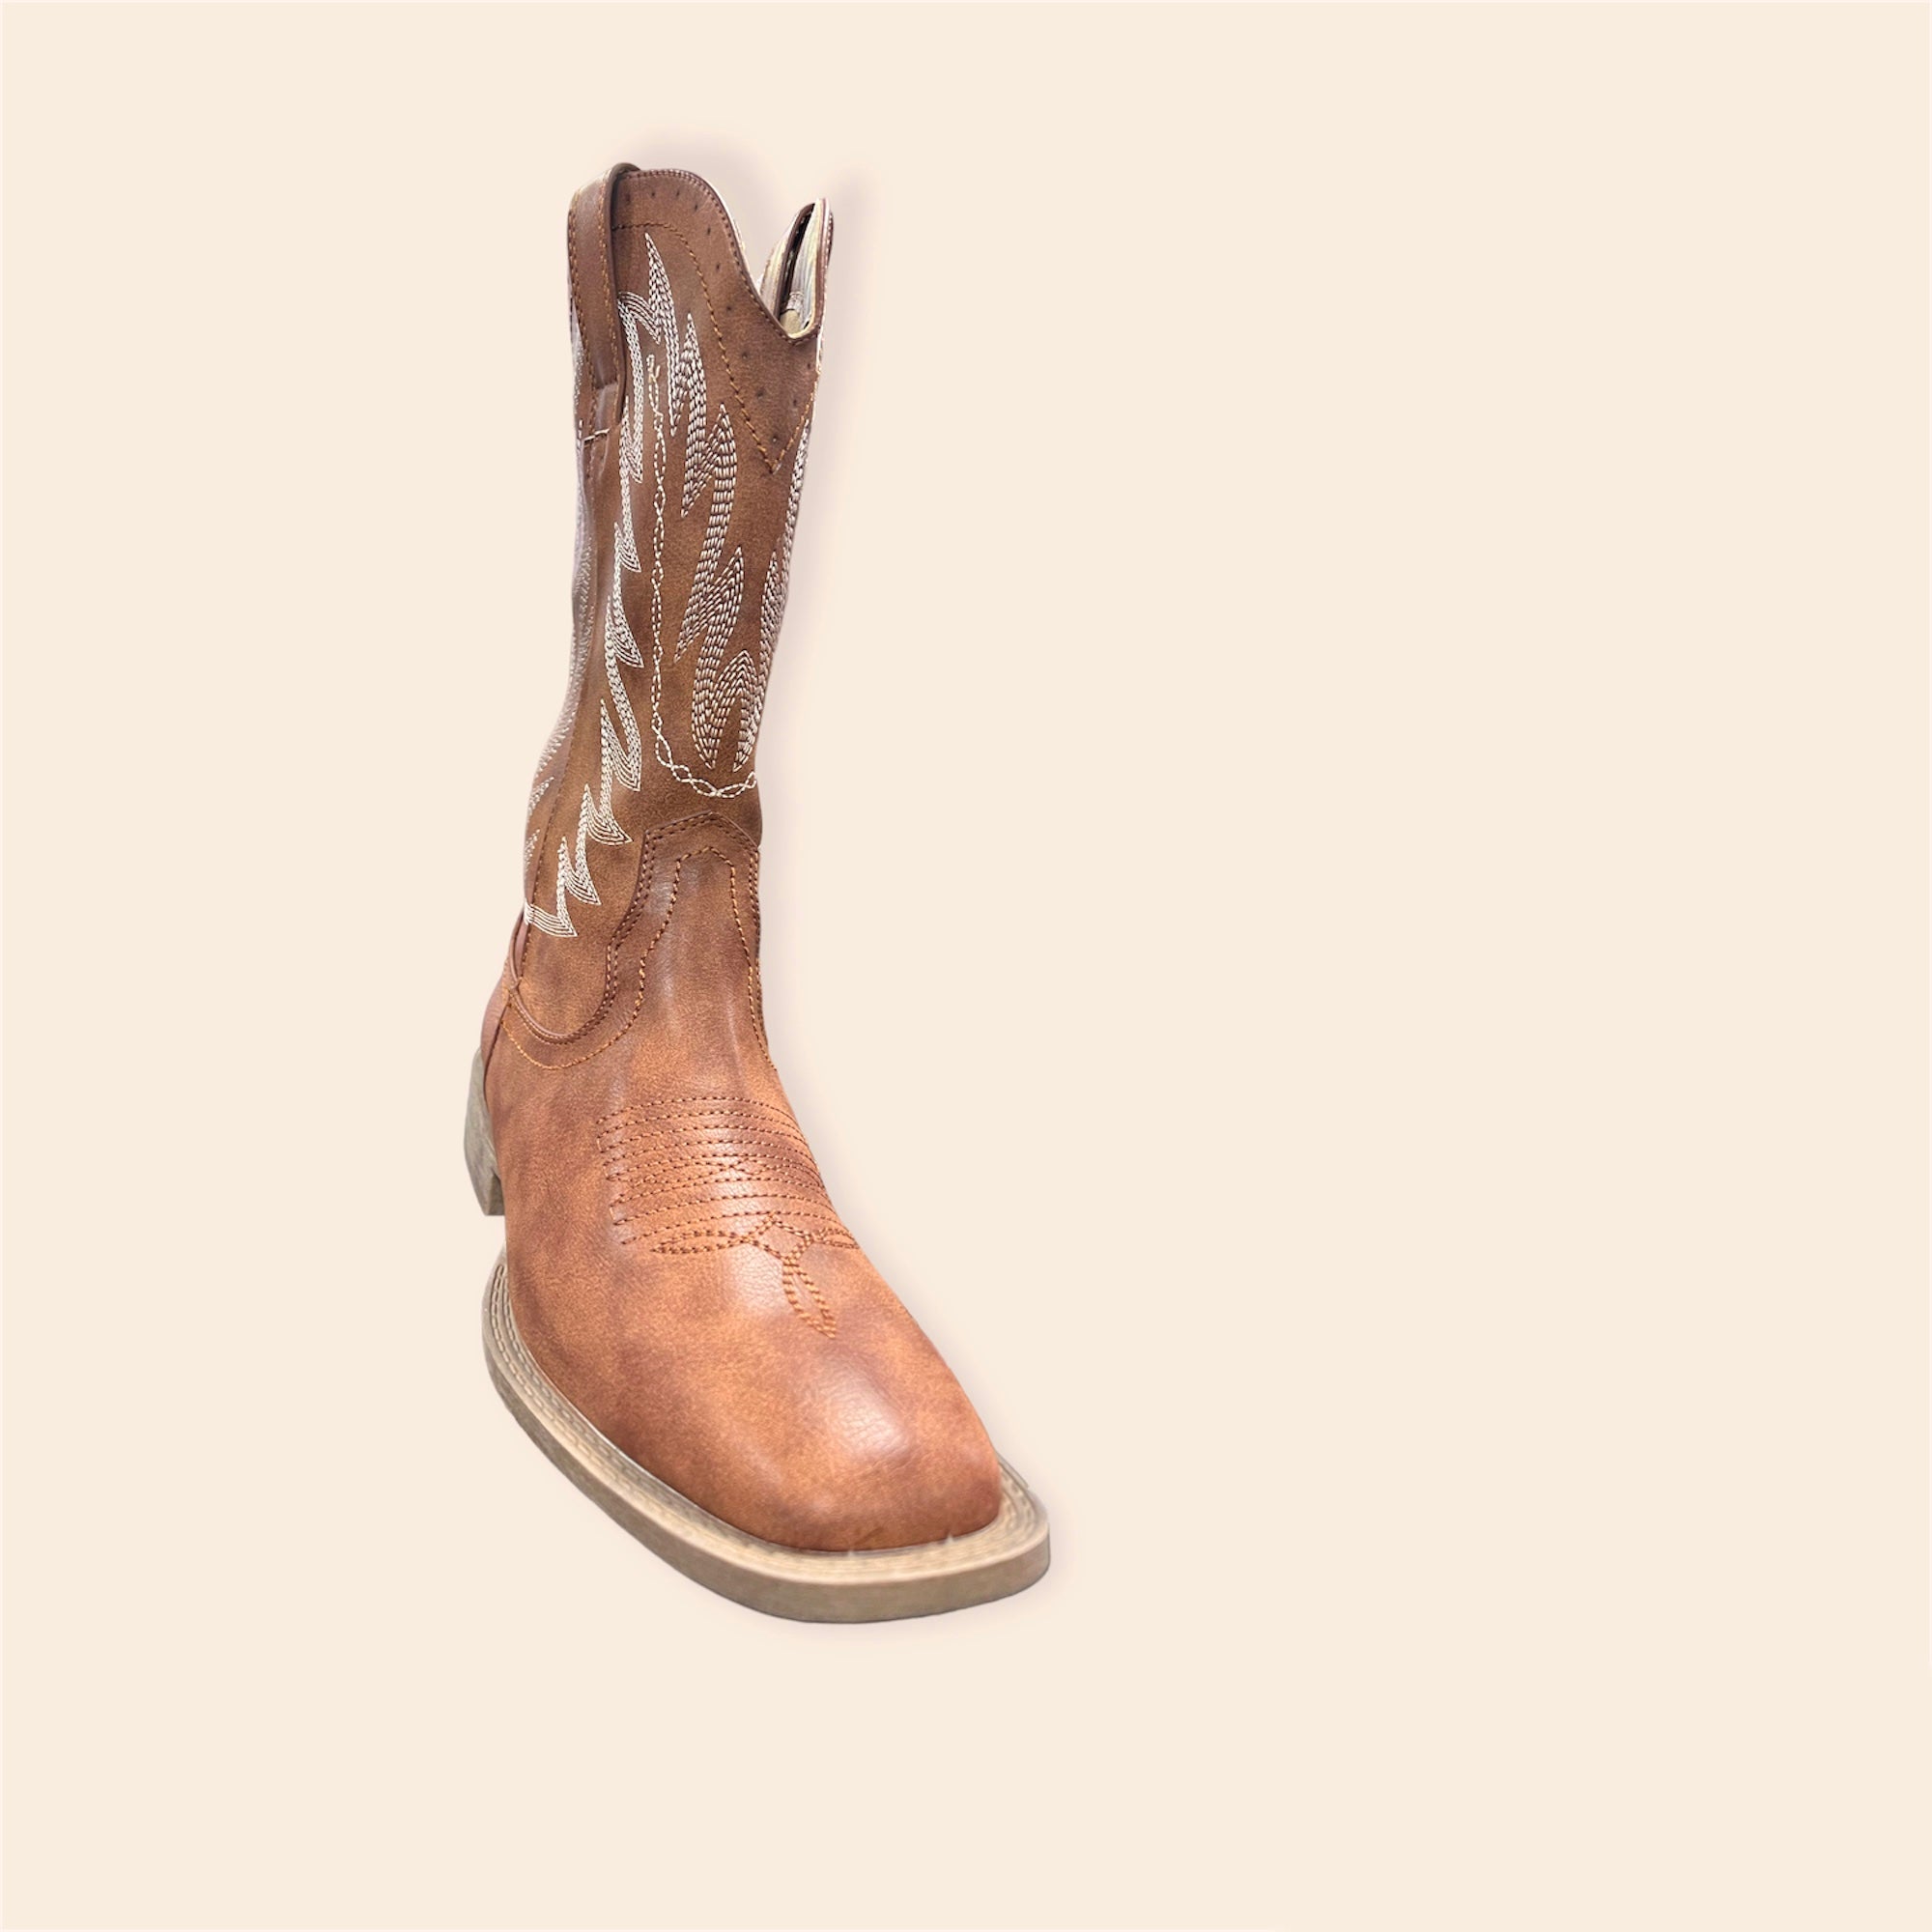 Wyoming Boots